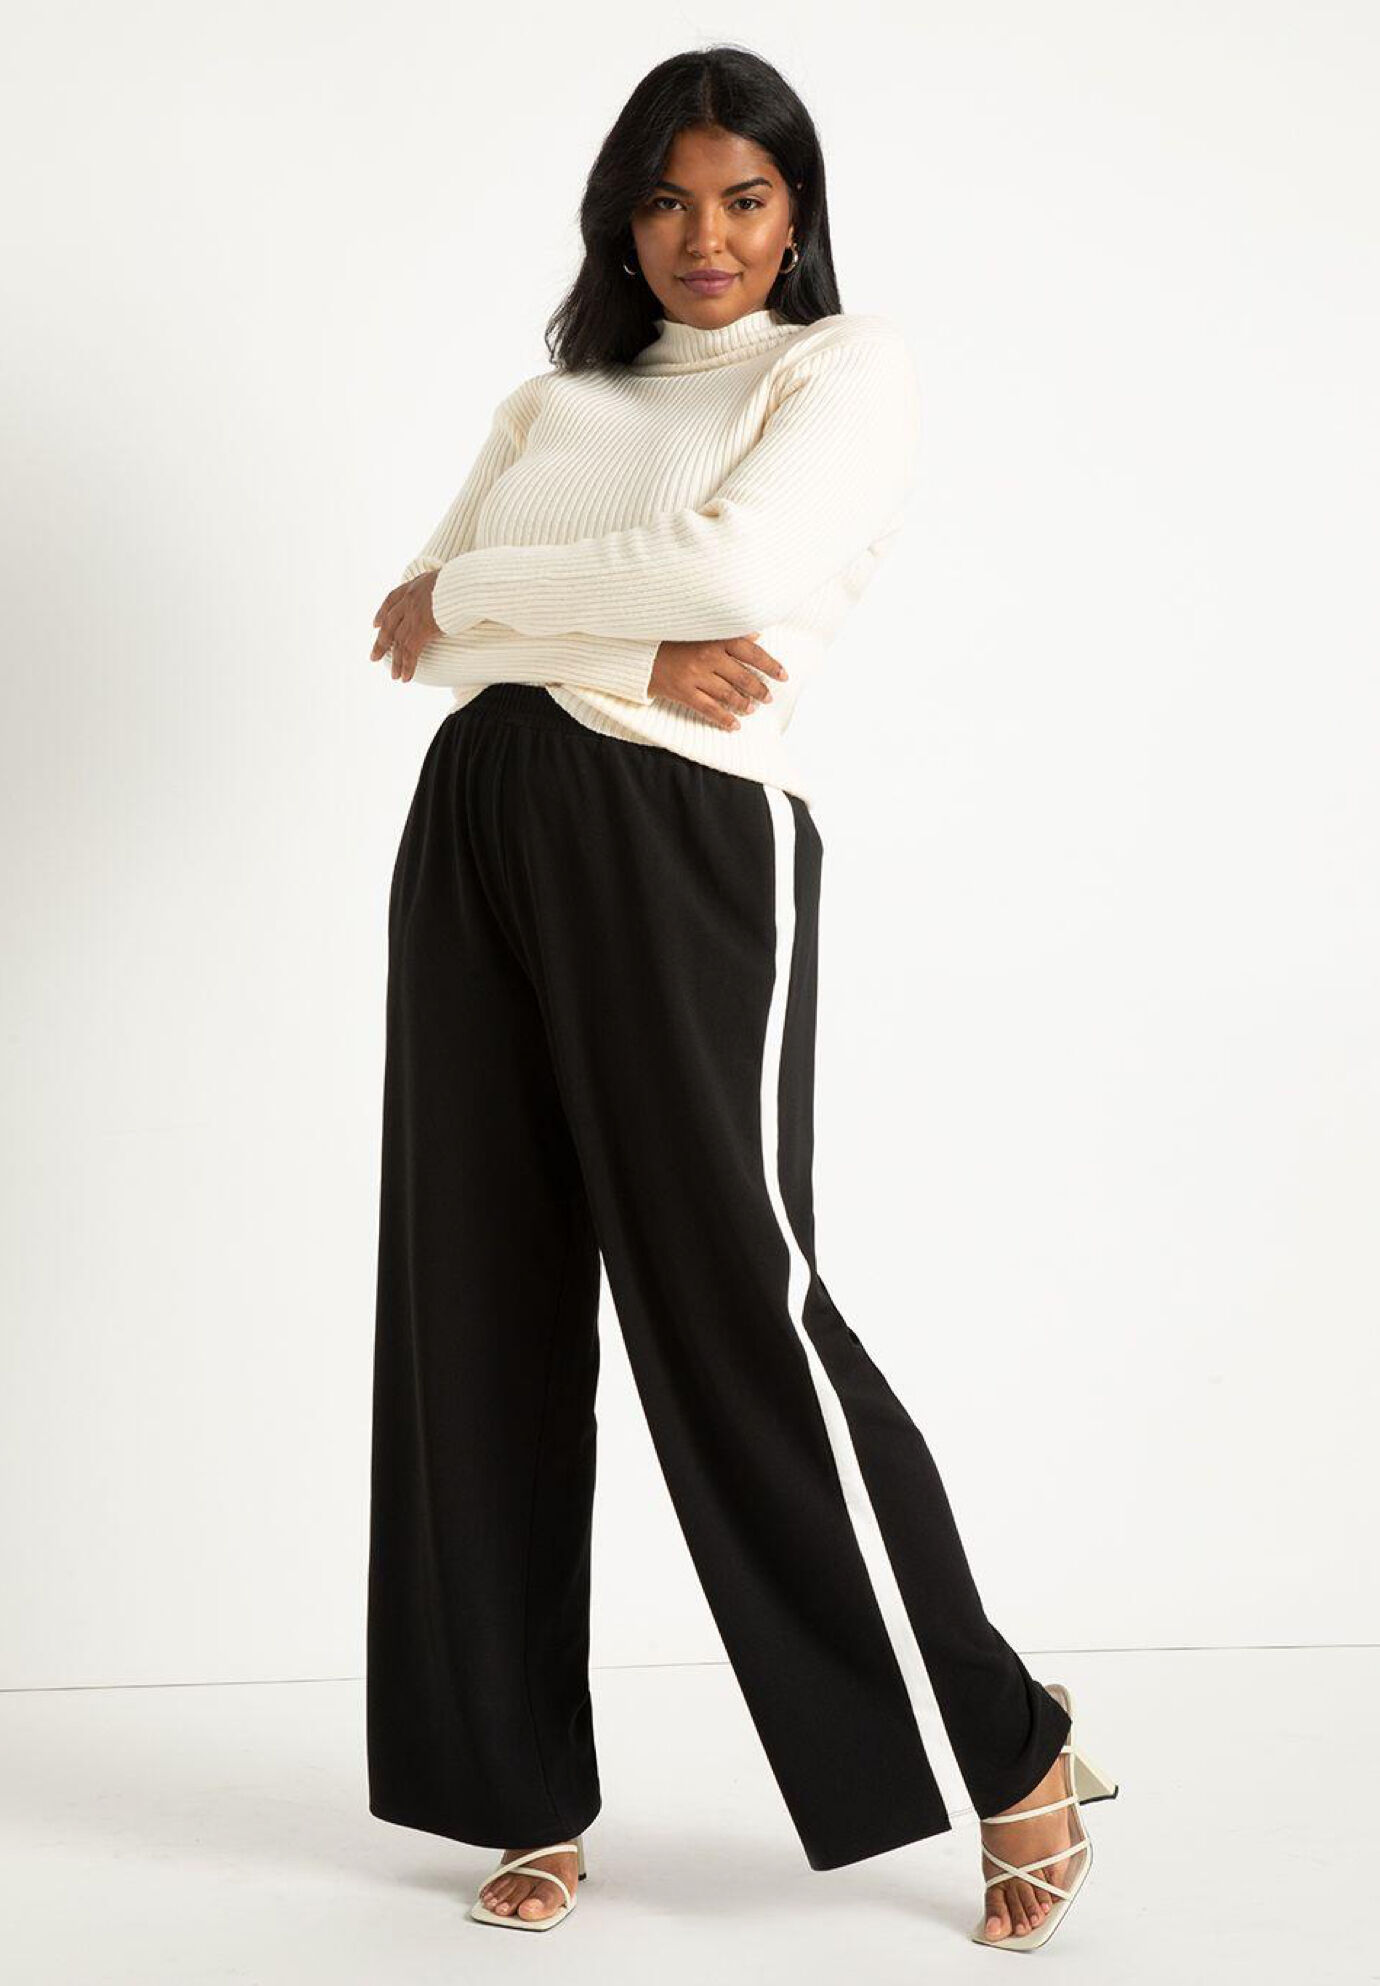 Buy Online Women Stylish Black Striped Volume Play Trousers at best price -  Pluss.in